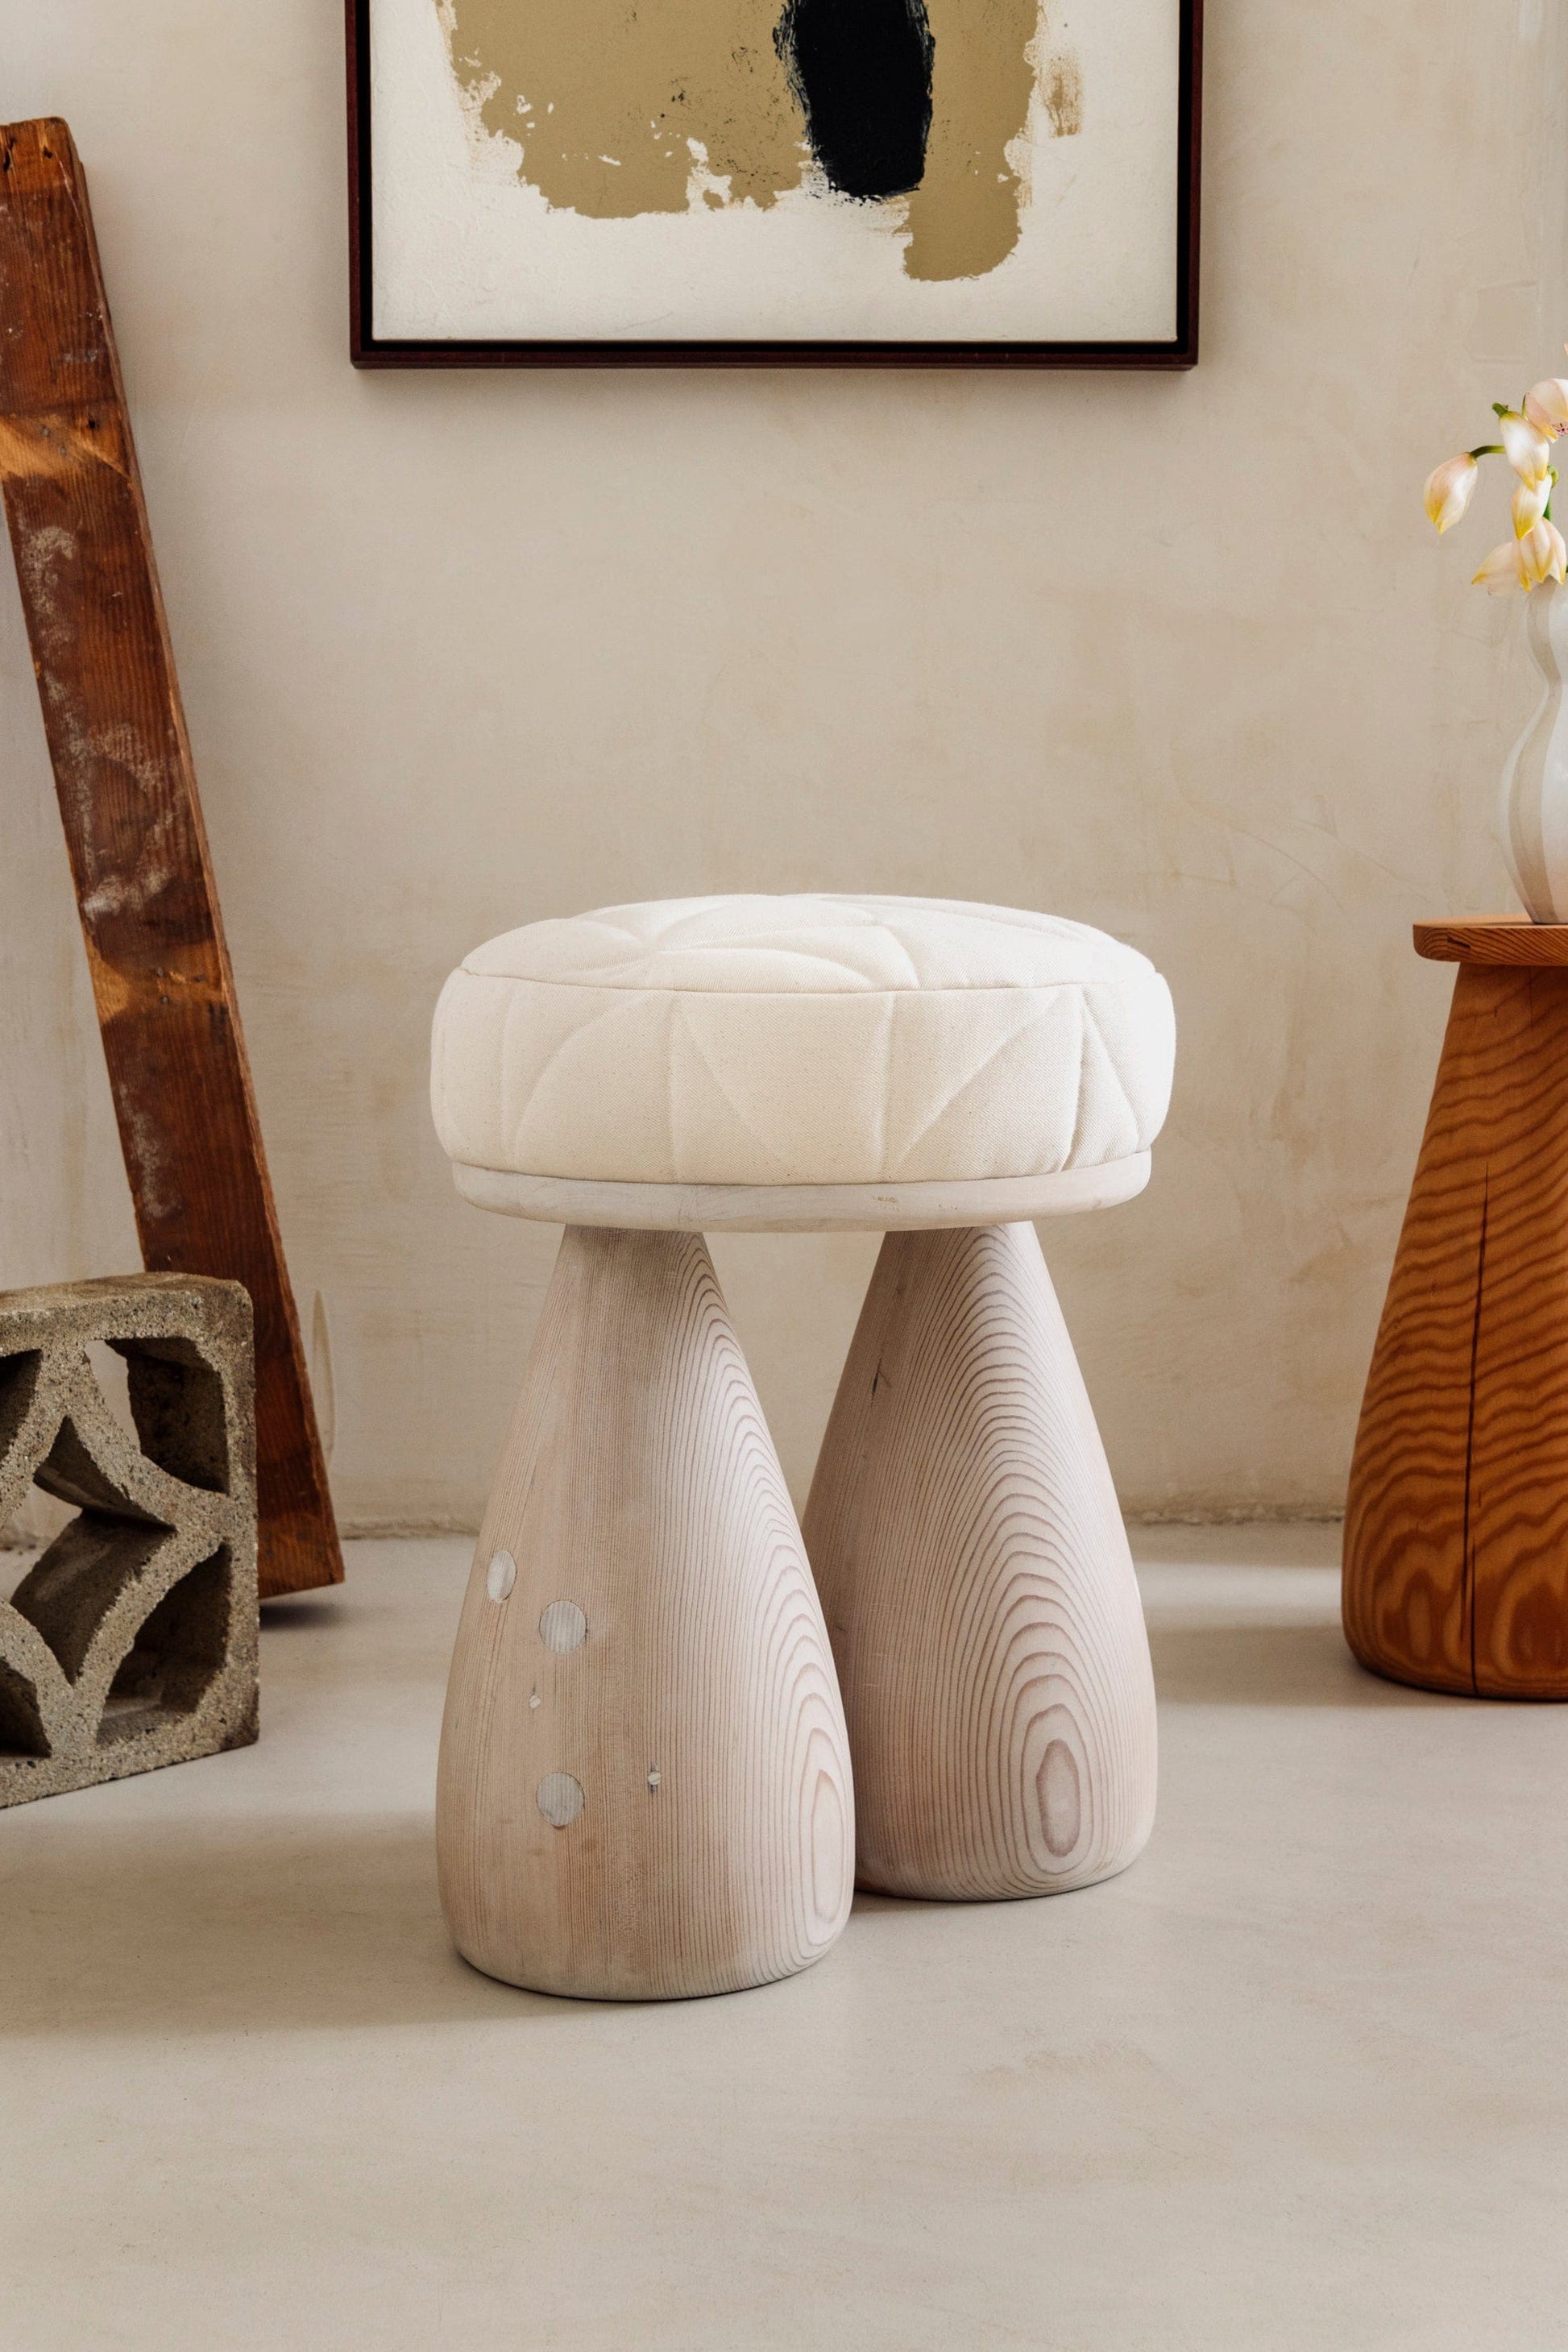 Contemporary Quilted Stool by Studio Sam Klemick Stools